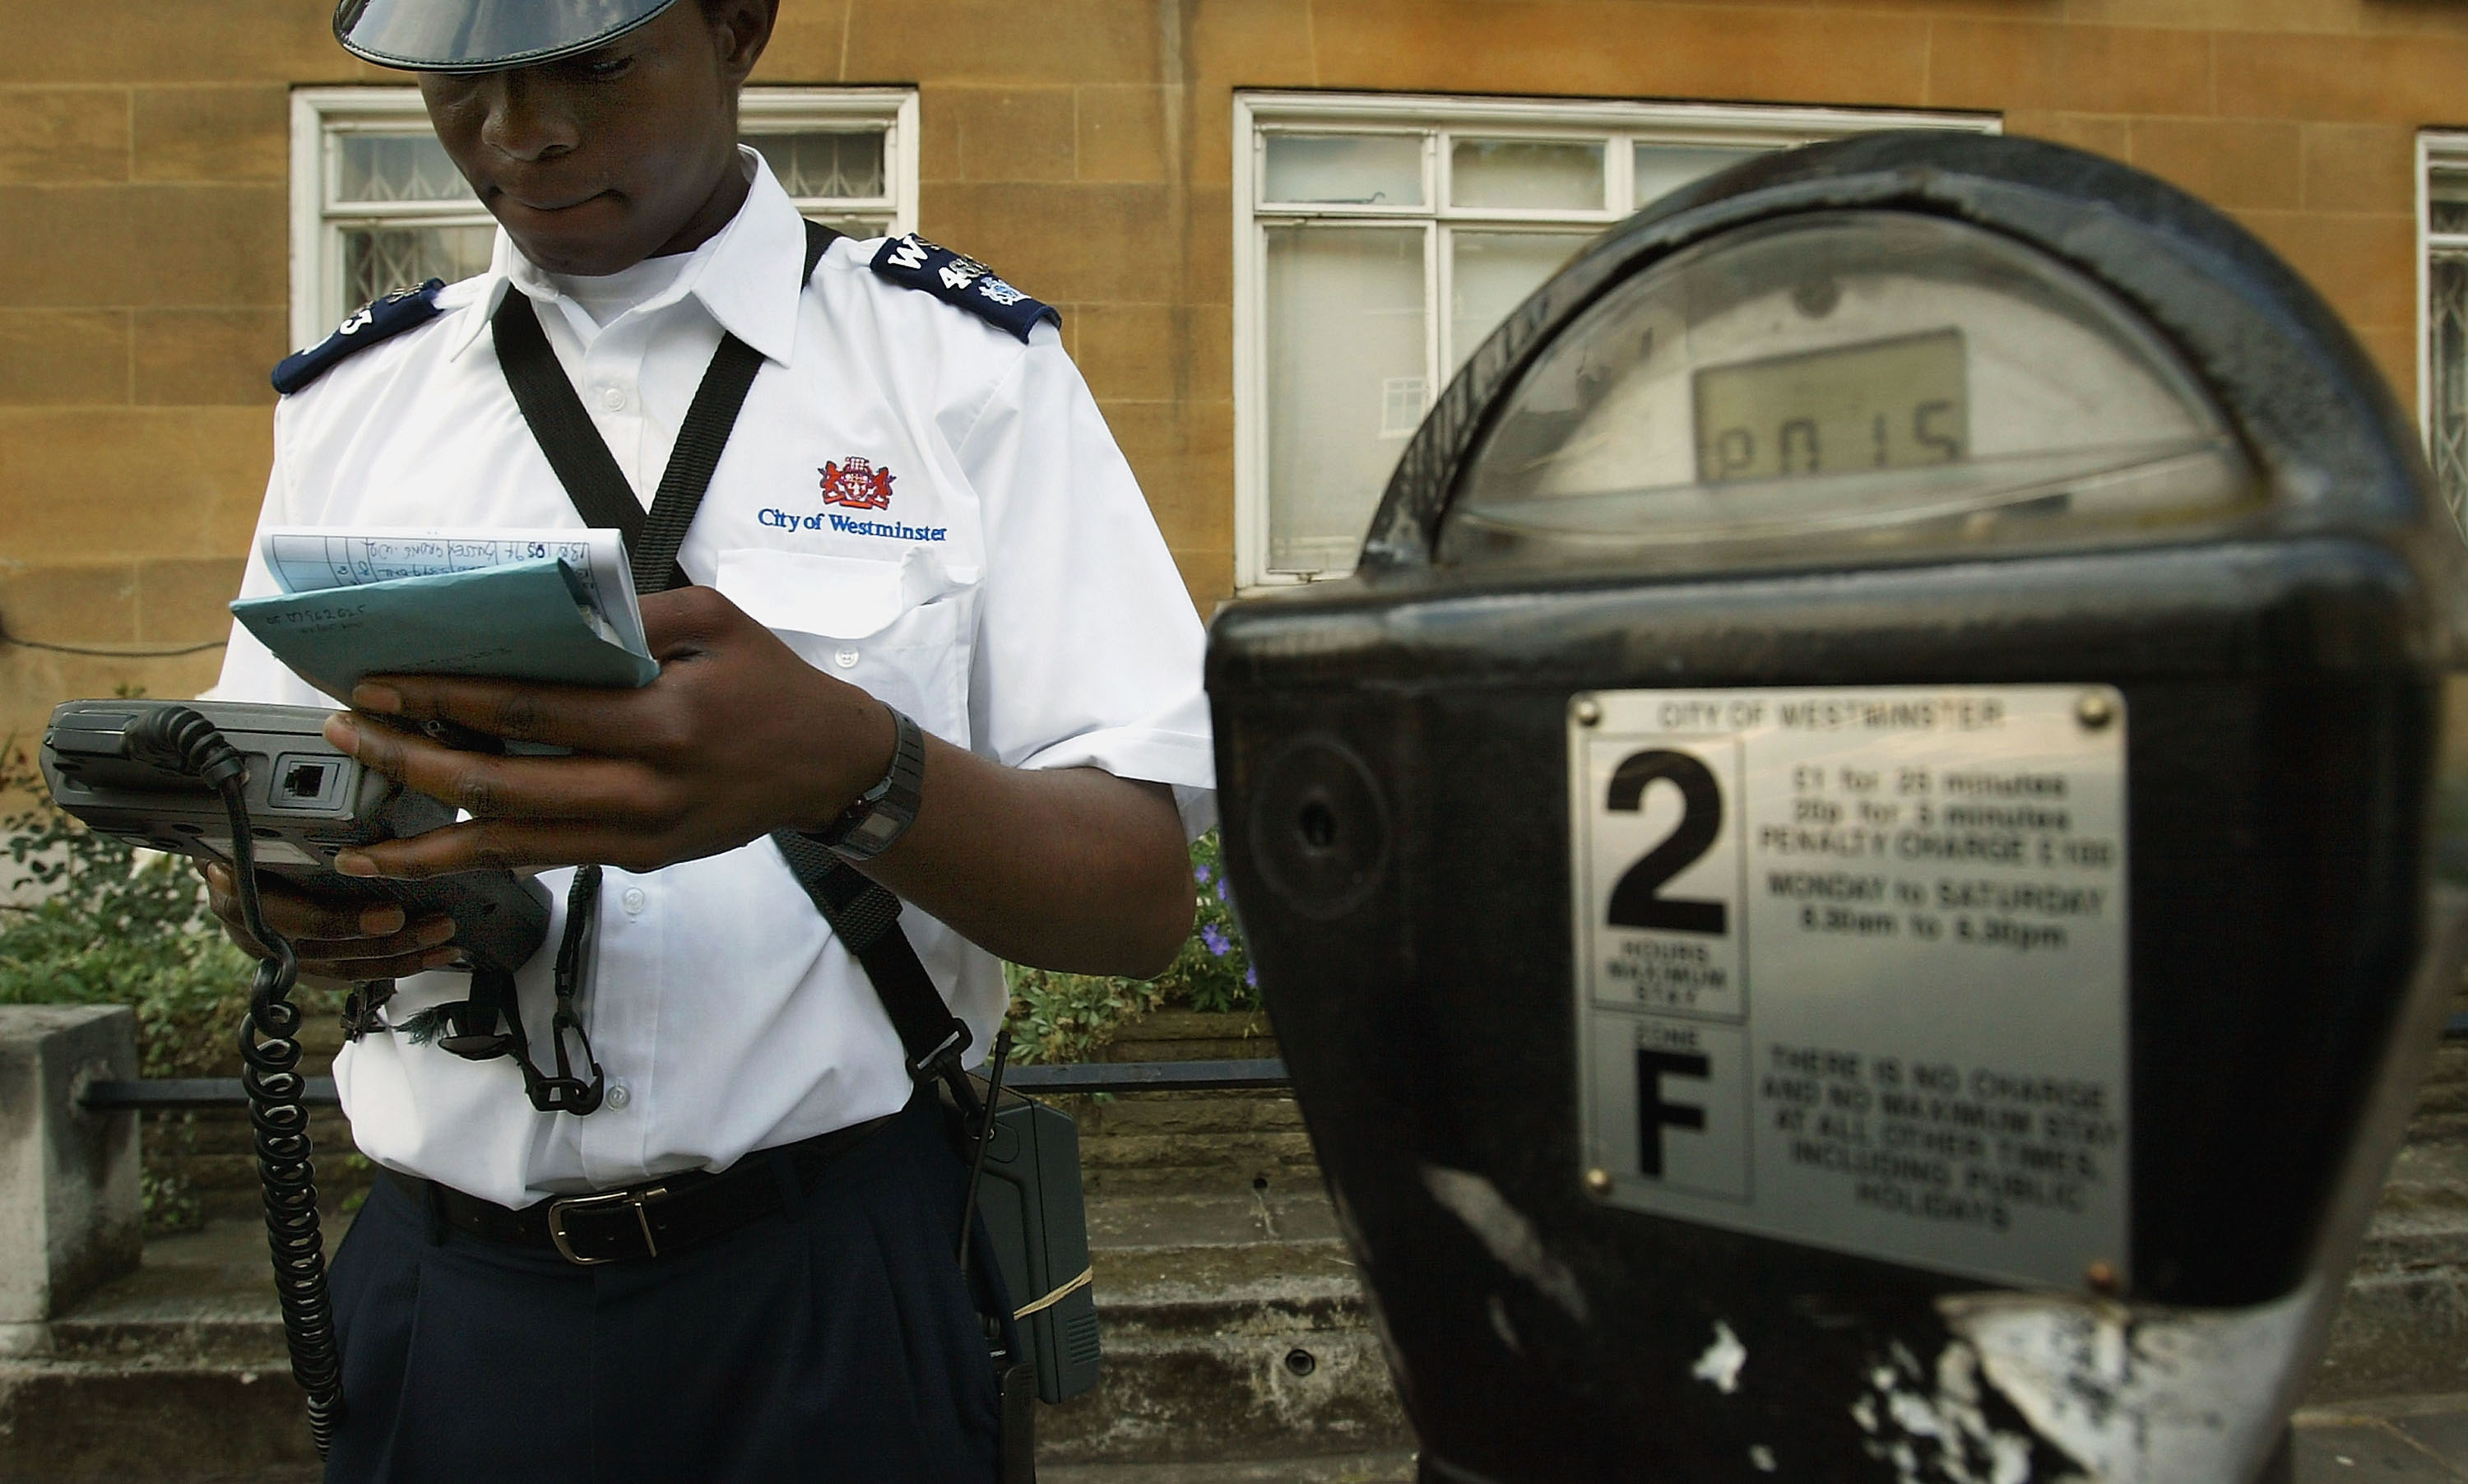 A Westminster traffic warden issues a parking ticket on July 7, 2004 in London, England. (Scott Barbour&mdash;Getty Images)